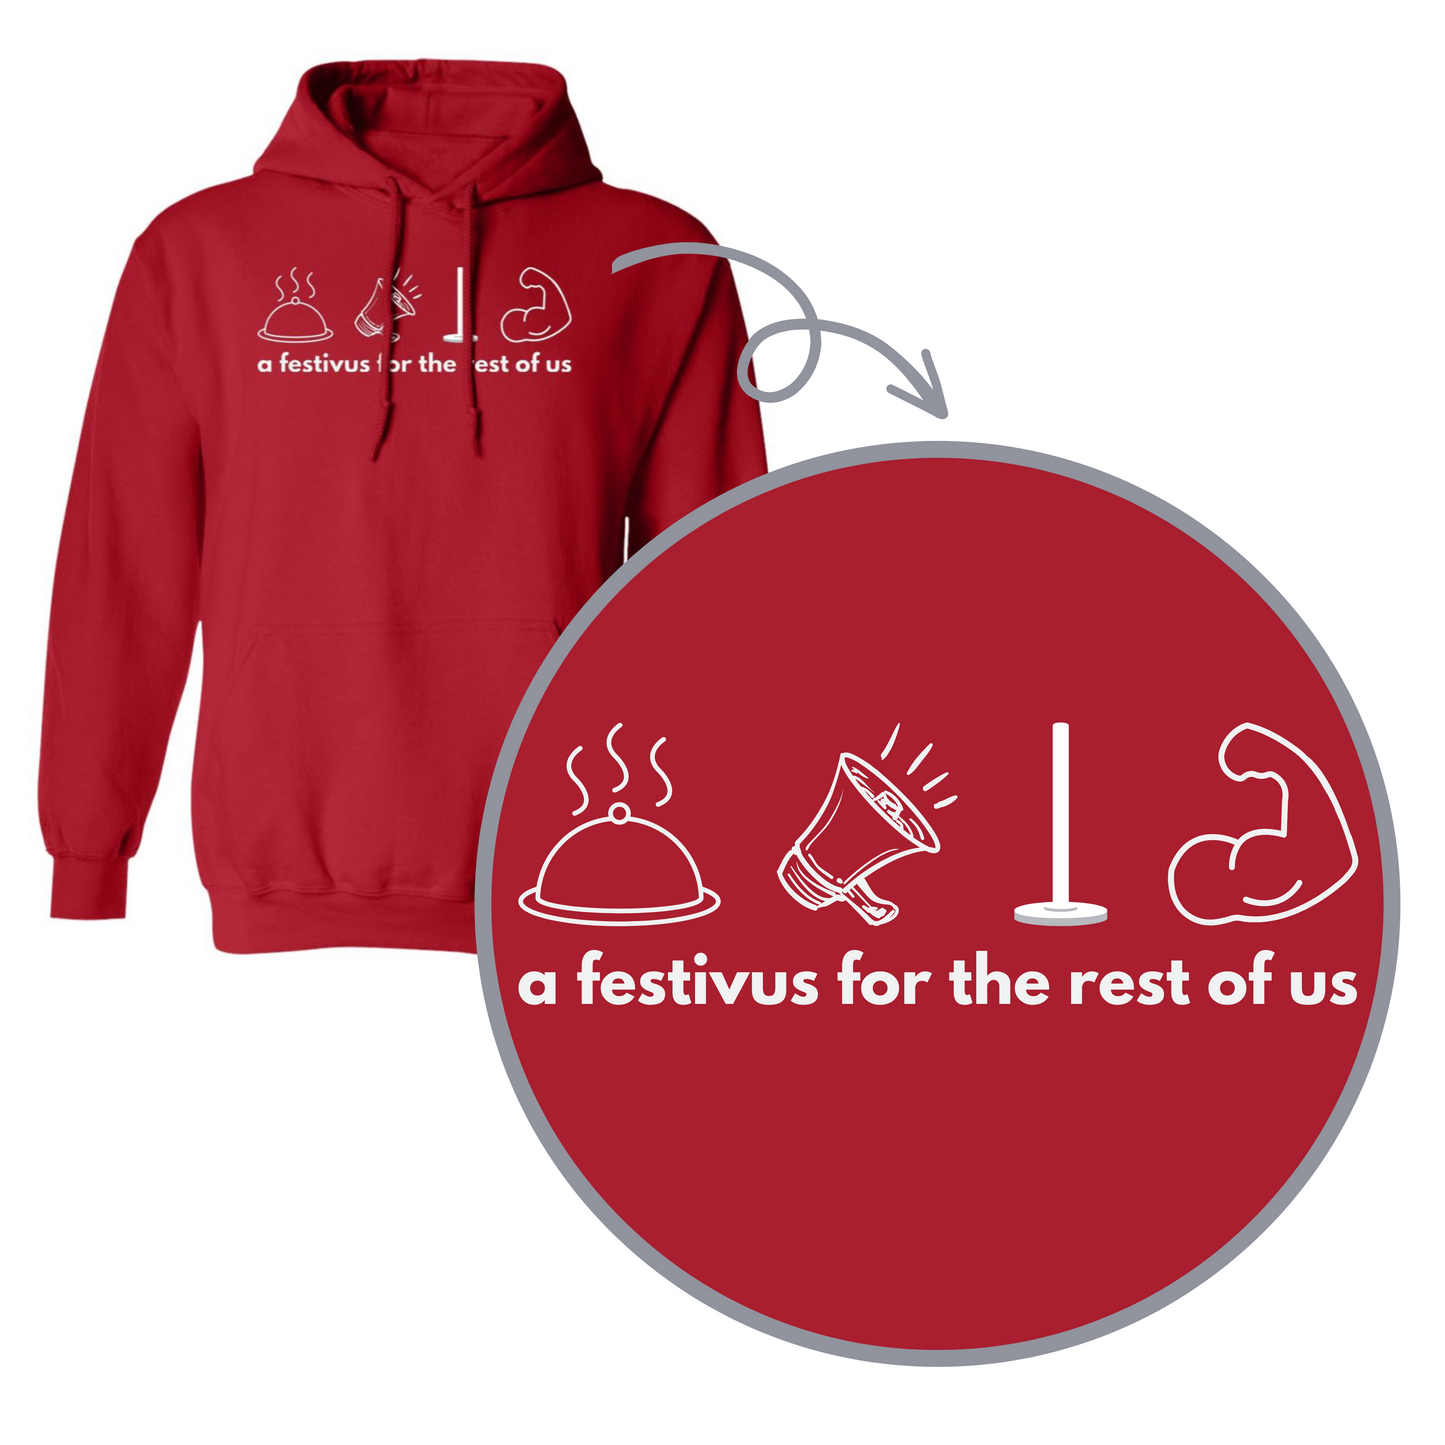 Festivus for the Rest of Us- Adult Sweatshirts